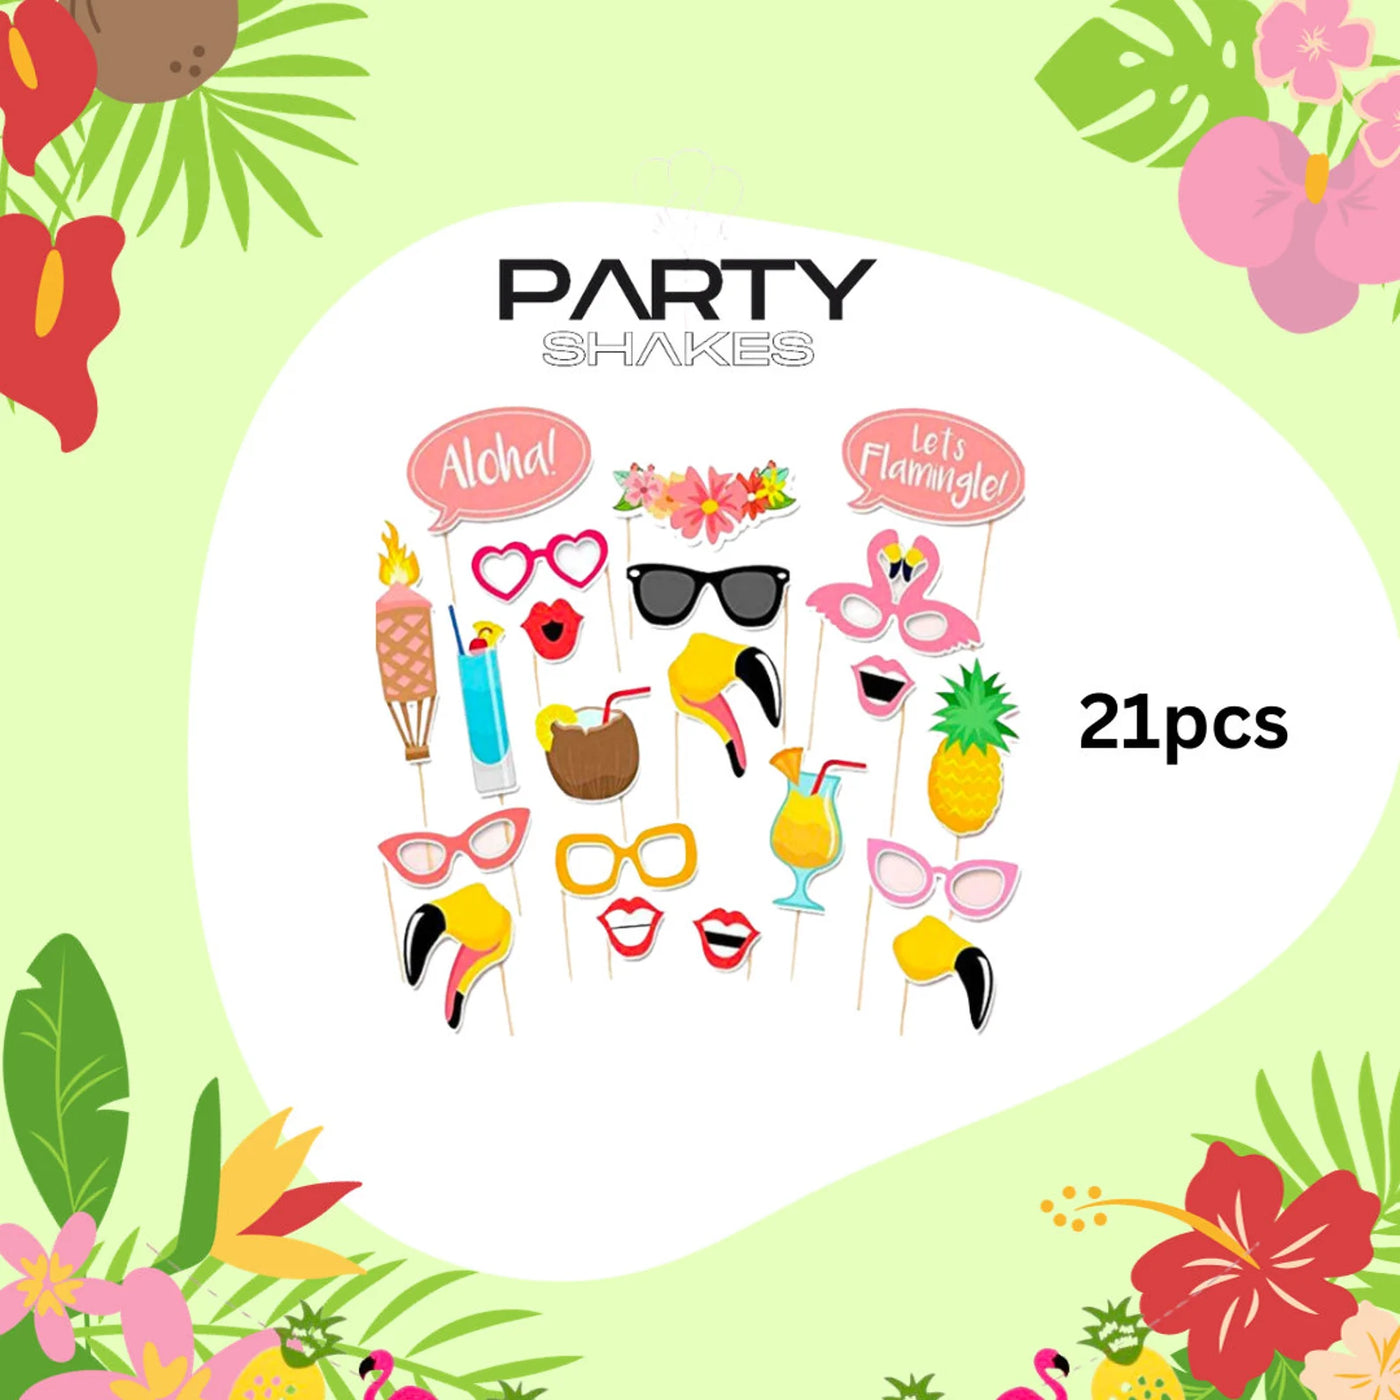 The Hawaiian Summer Party Decorations Set is a versatile choice for decorating walls, windows, fireplaces, and tables. It is a great addition to summer gatherings, Hawaiian or tropical-themed events, poolside parties, barbecues, birthdays, homecomings, graduations, baby showers, weddings, and more.